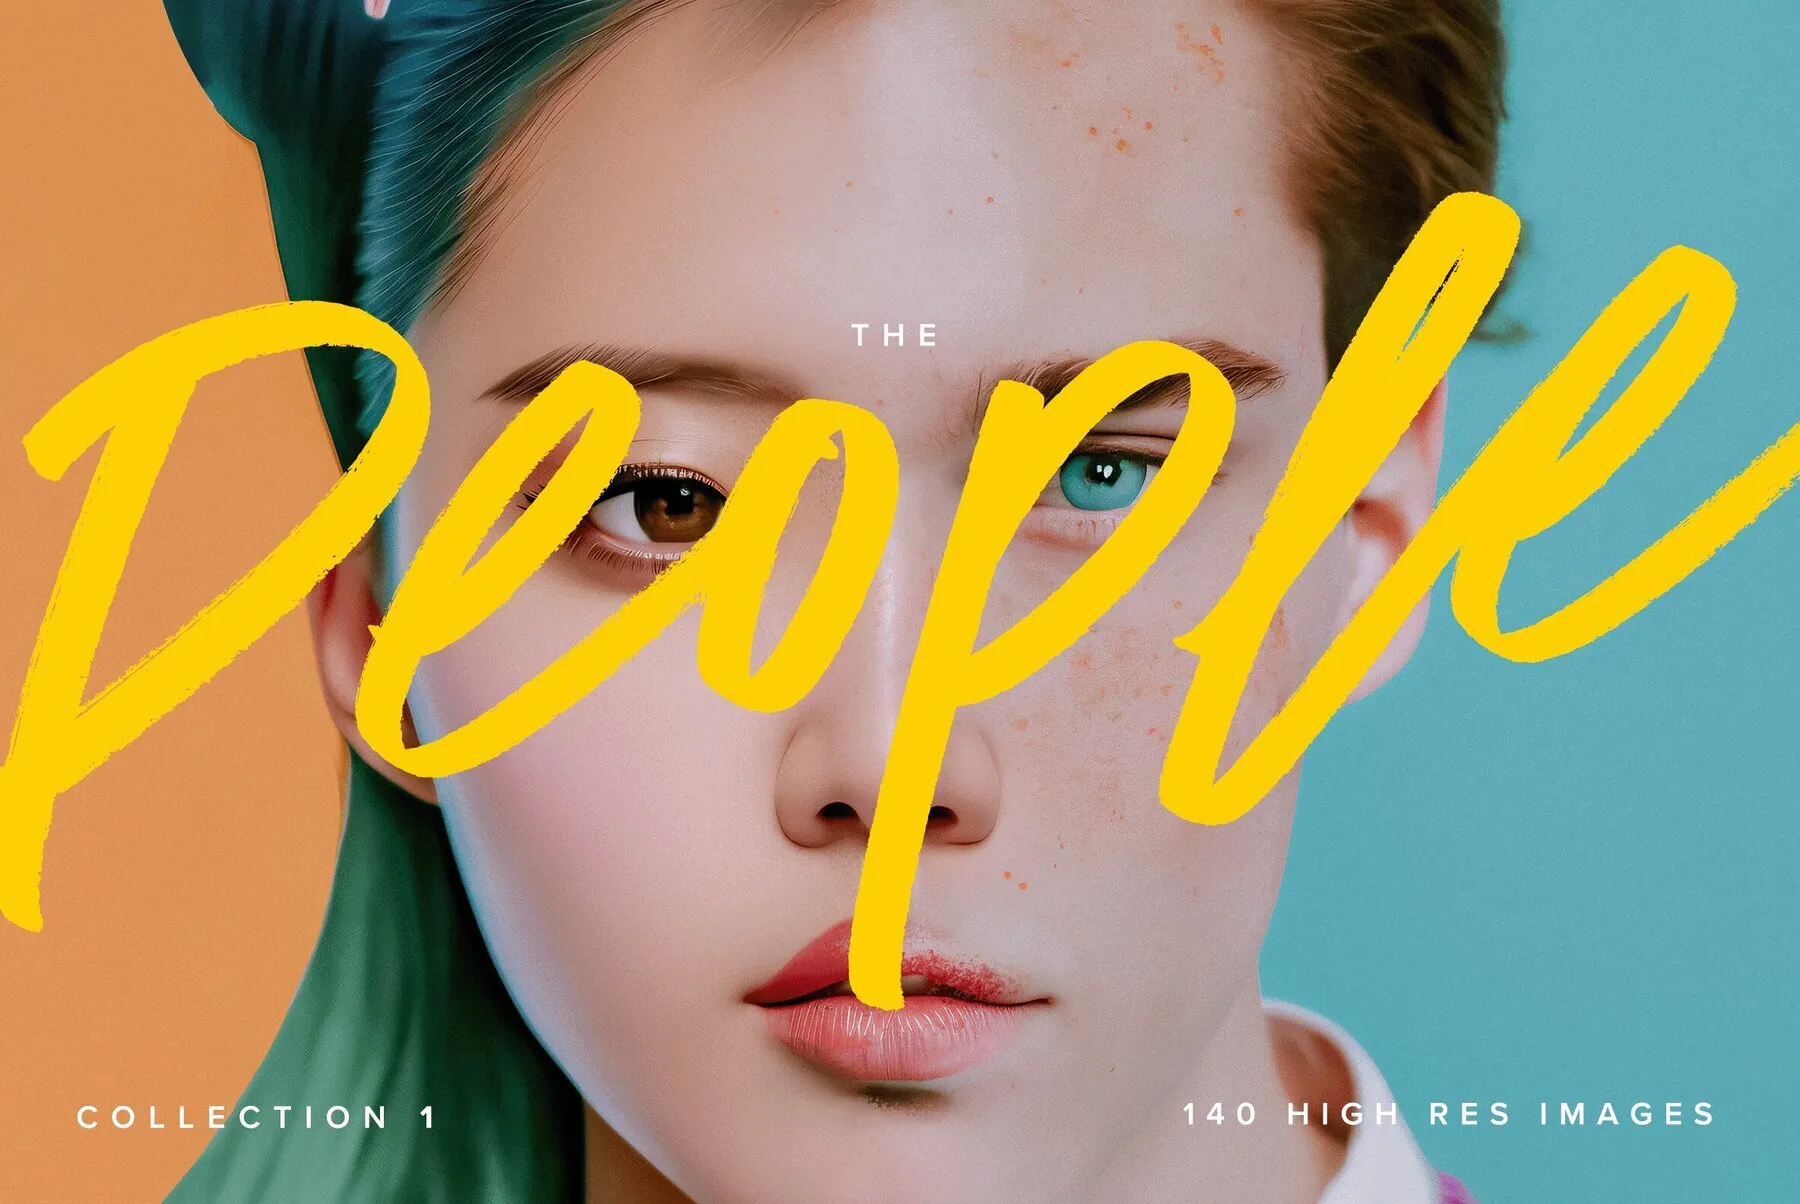 The People Collection 1